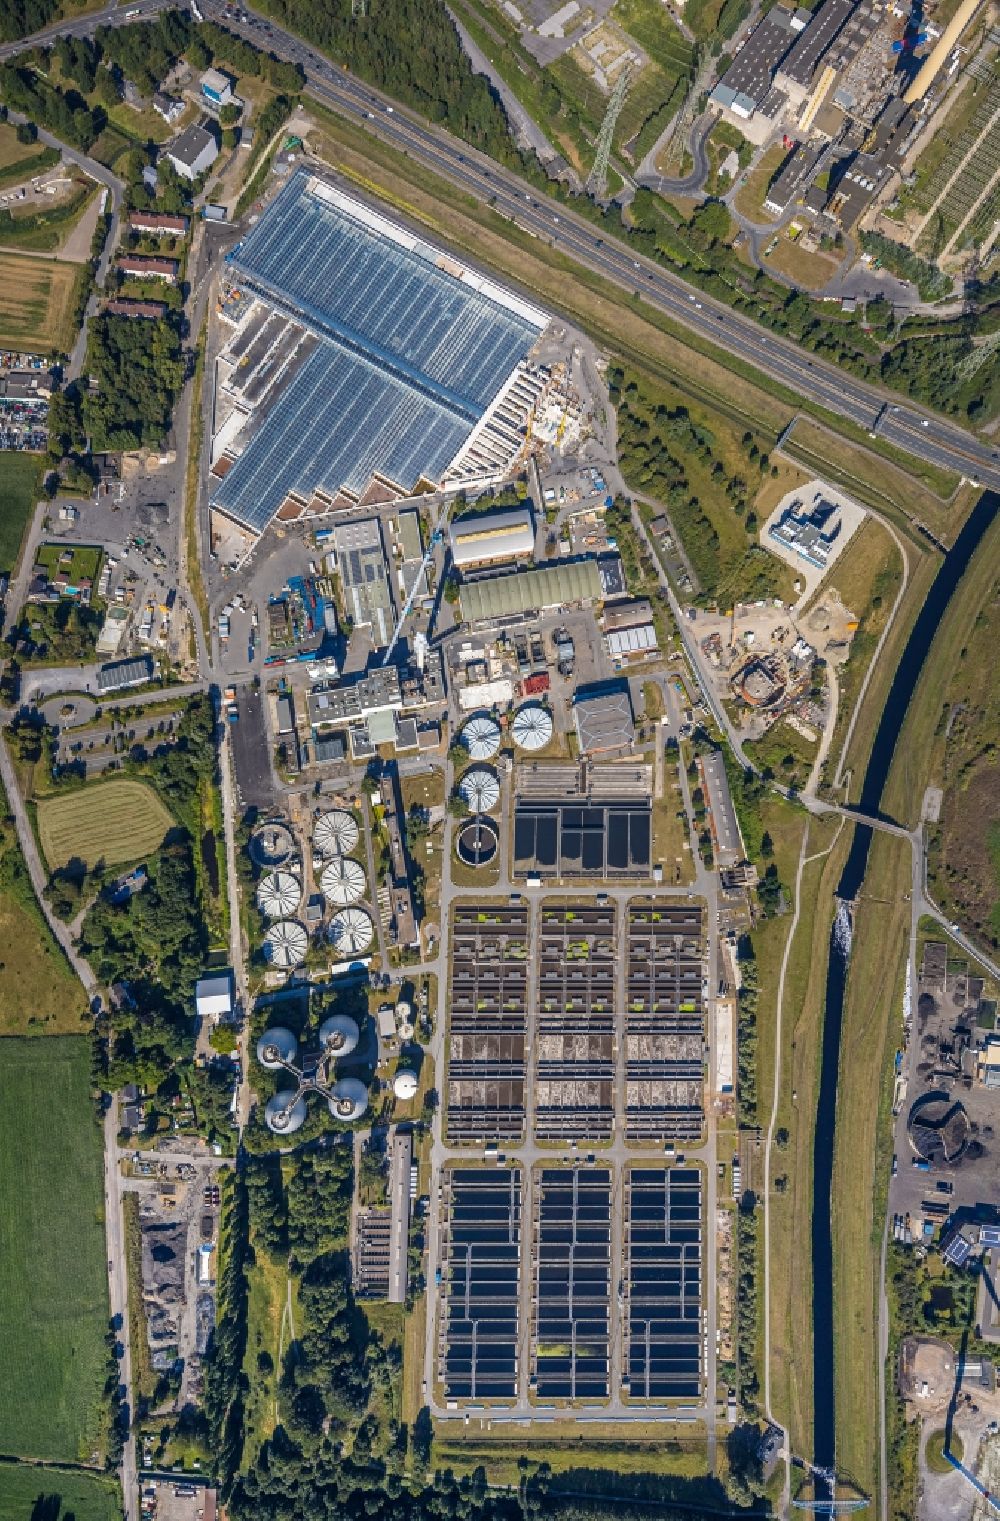 Vertical aerial photograph Bottrop - Vertical aerial view from the satellite perspective of the sewage works Basin and purification steps for waste water treatment Emschergenossenschaft Klaeranlage Bottrop in Bottrop in the state North Rhine-Westphalia